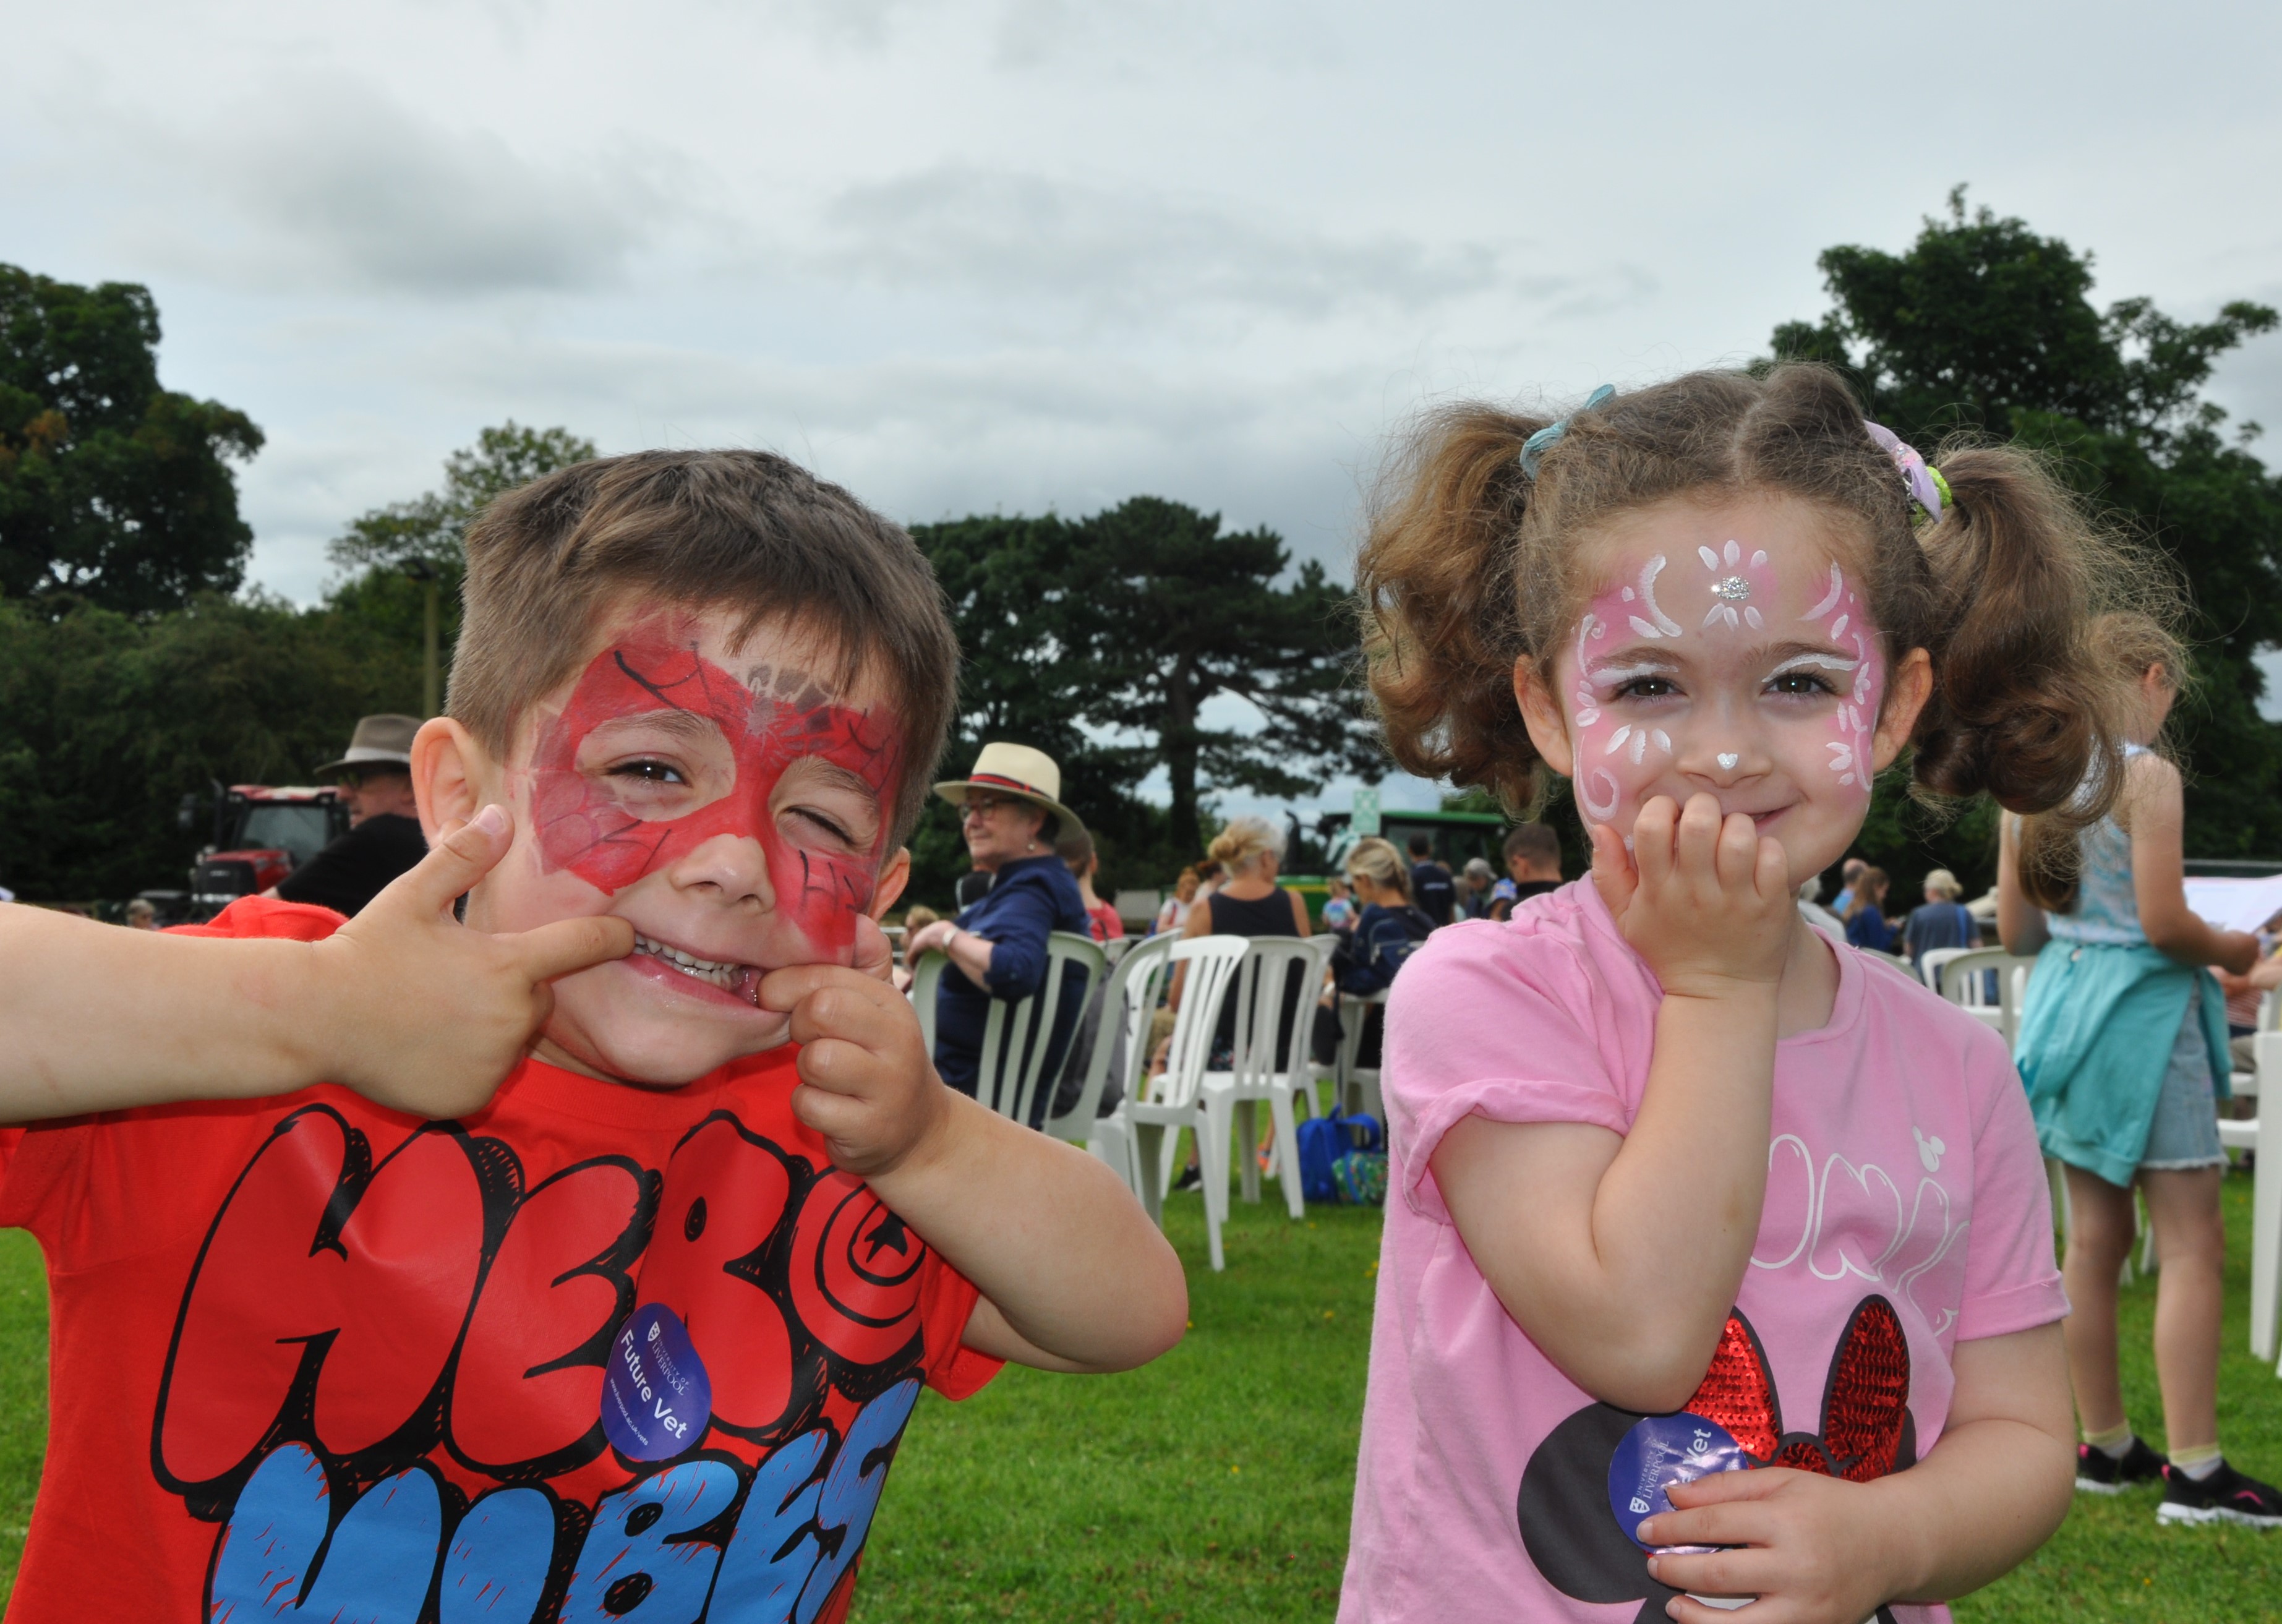 A couple of children with their faces painted